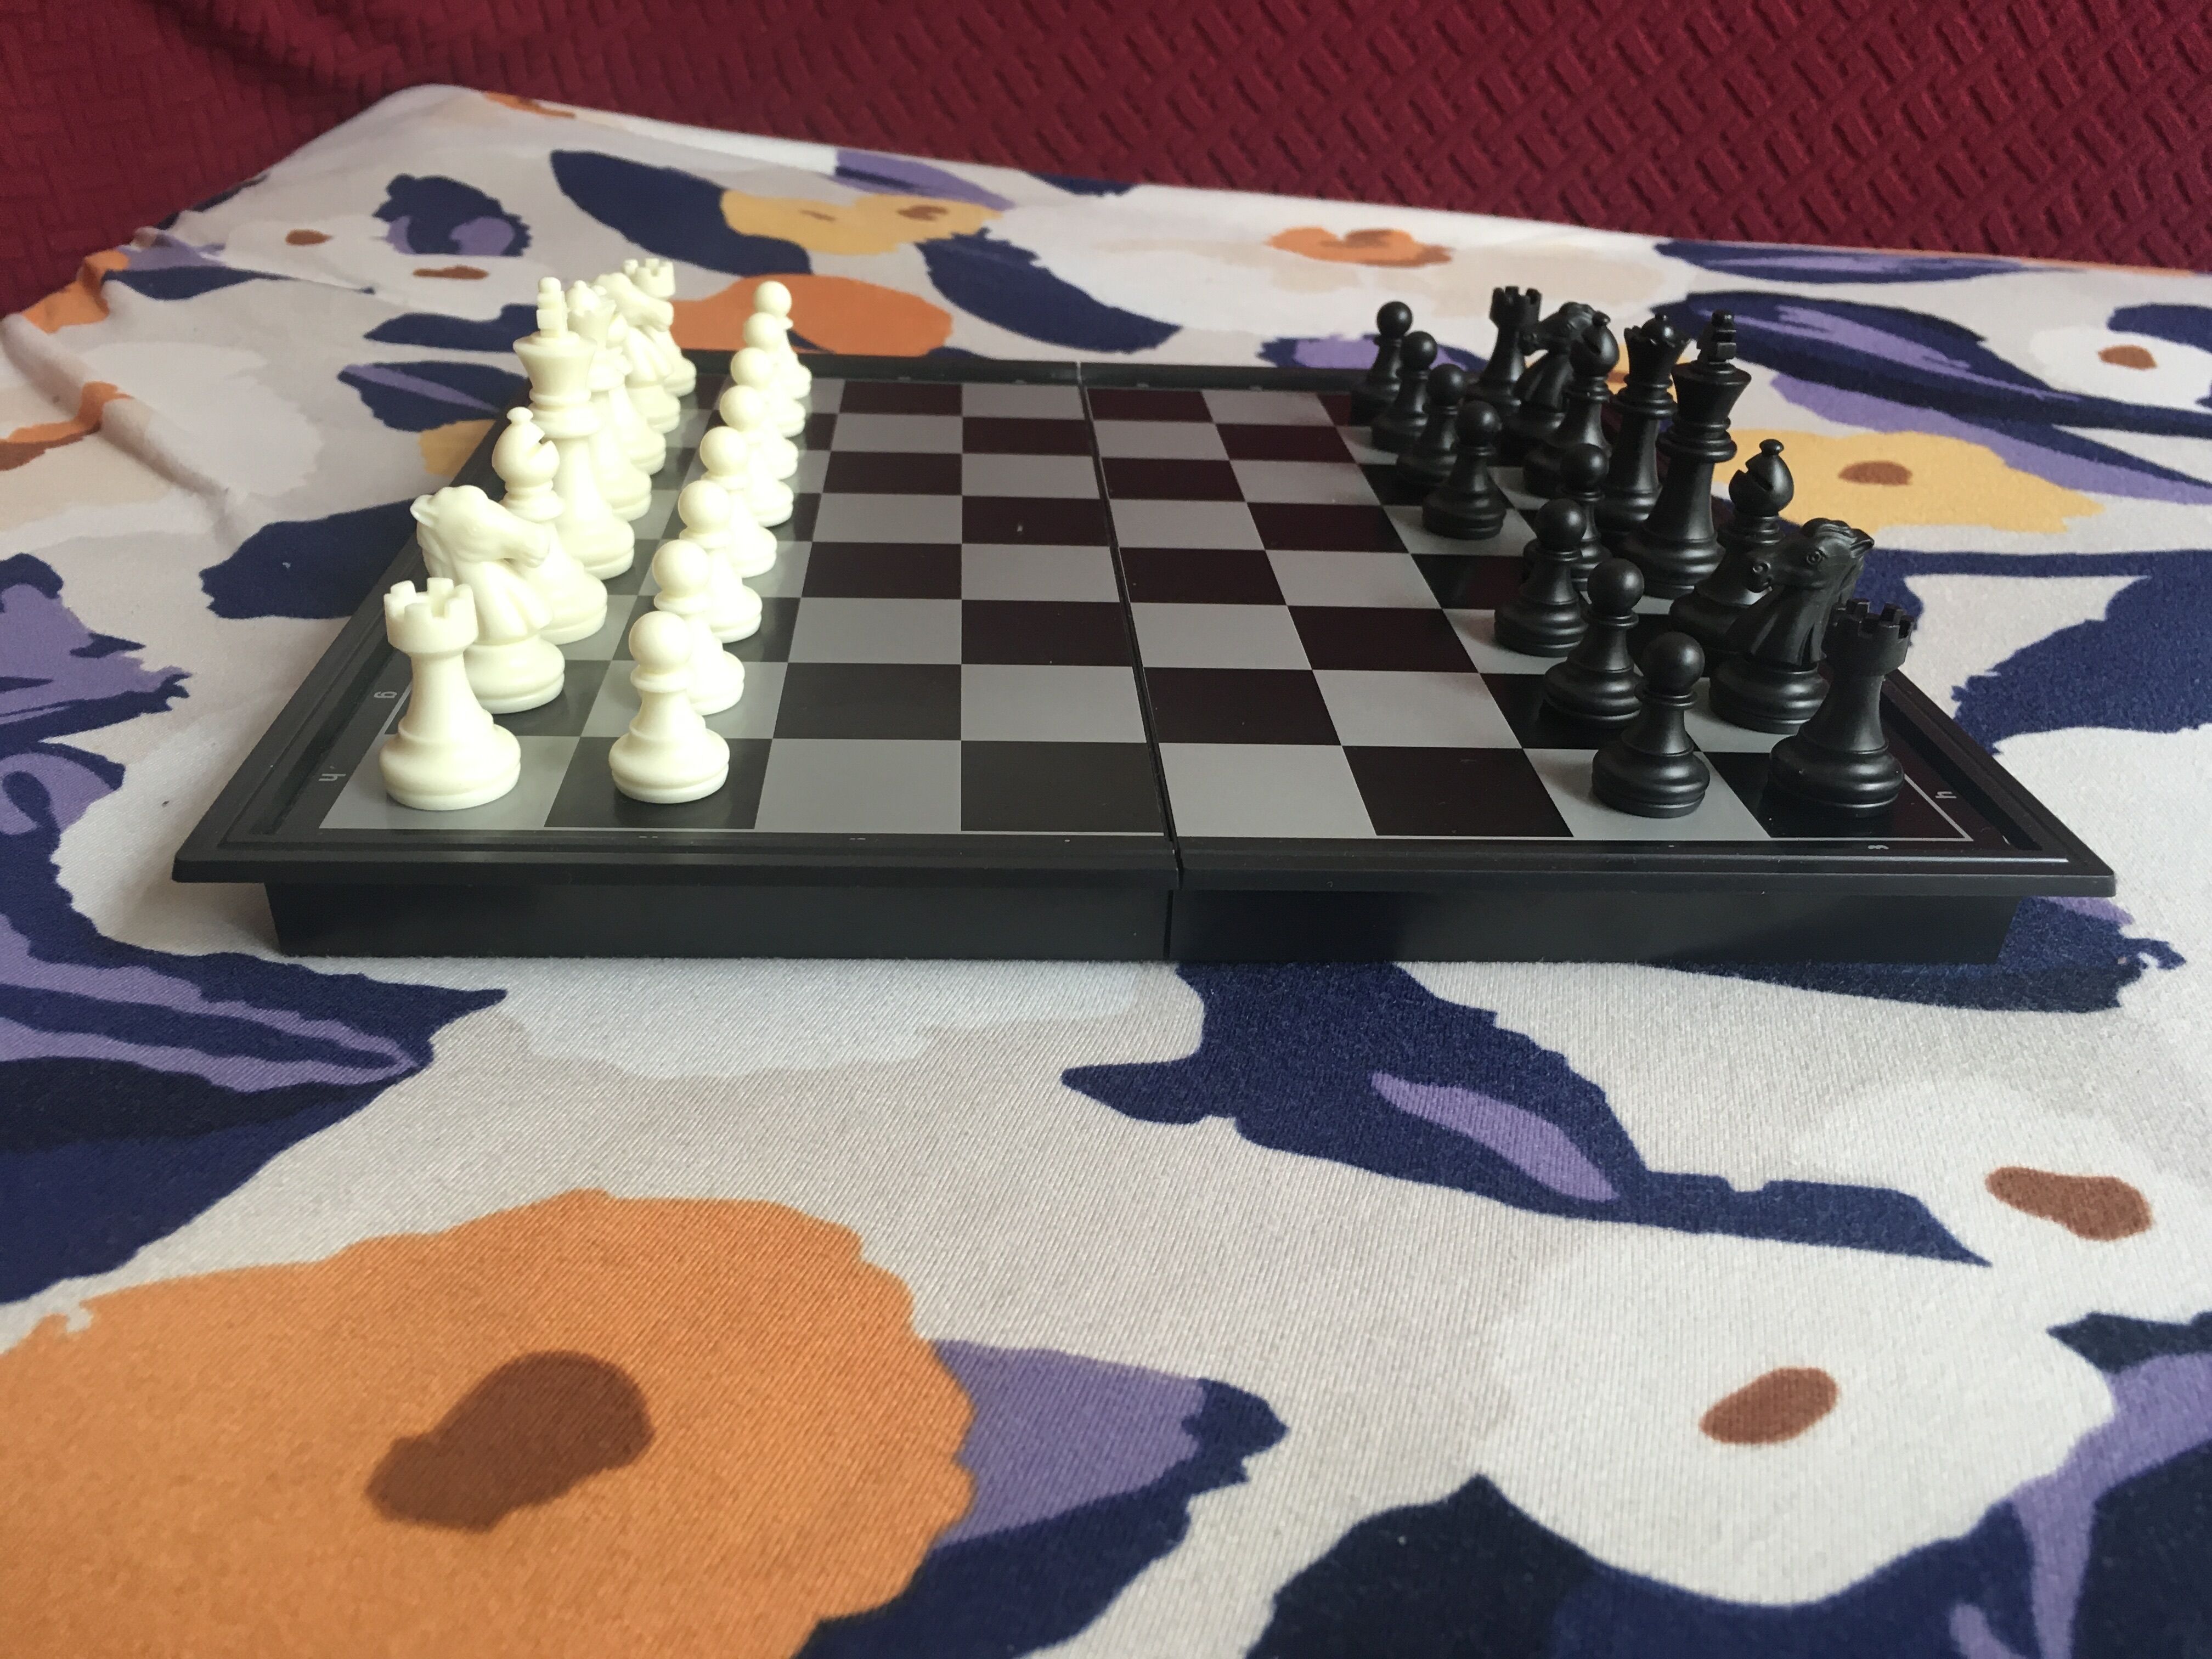 There are a lot of Chess 2 versions. In the last round, FPS Chess